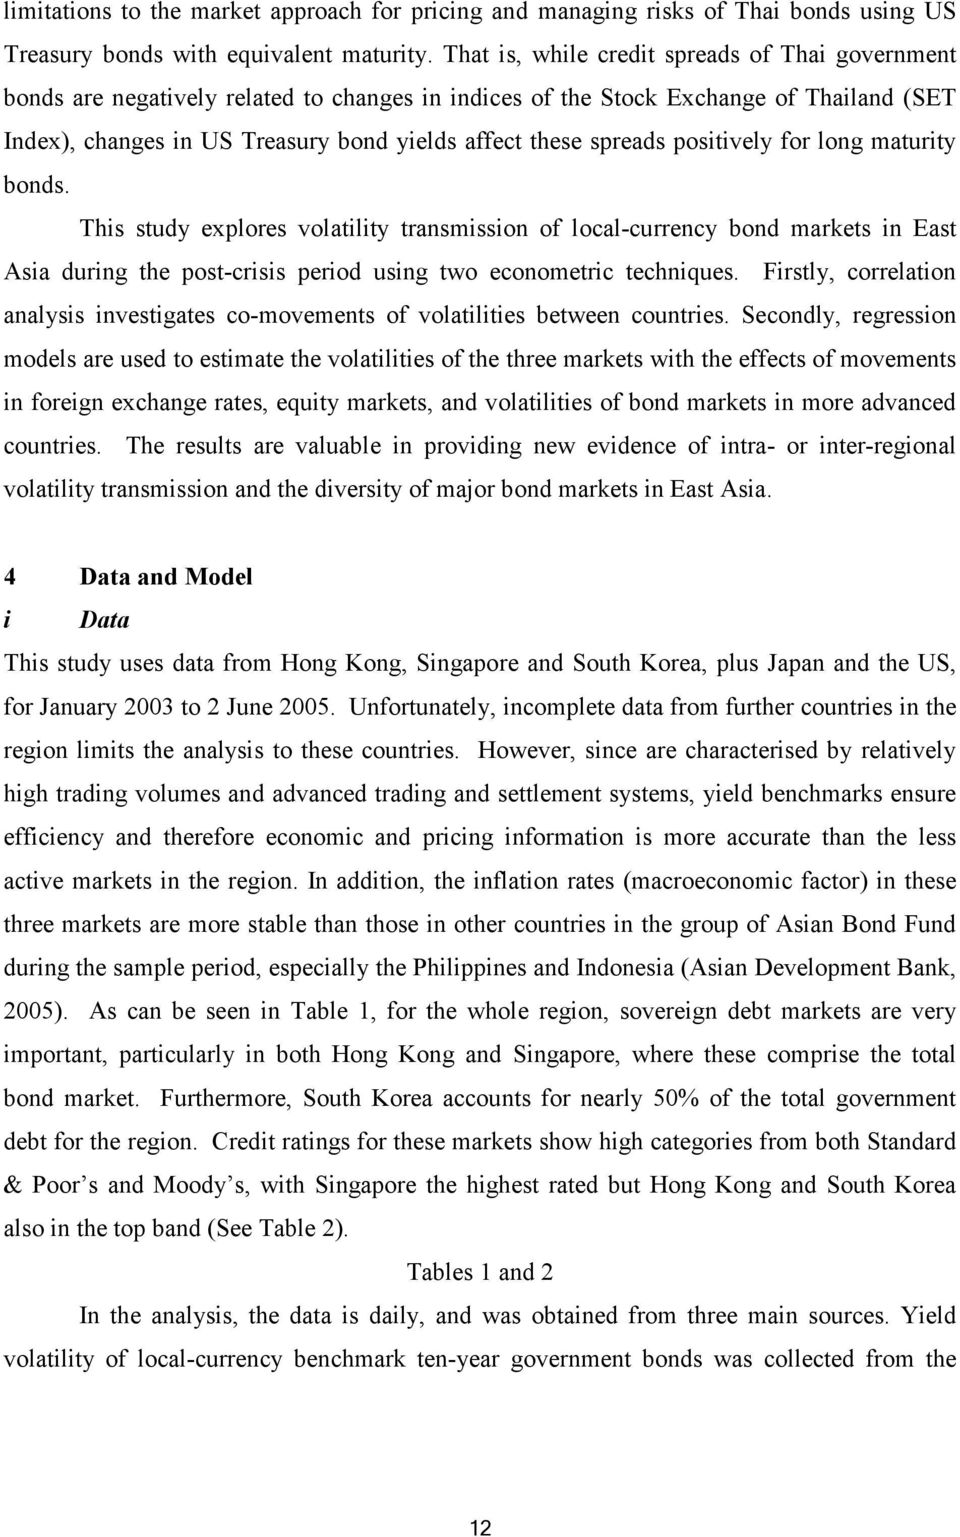 spreads positively for long maturity bonds. This study explores volatility transmission of local-currency bond markets in East Asia during the post-crisis period using two econometric techniques.